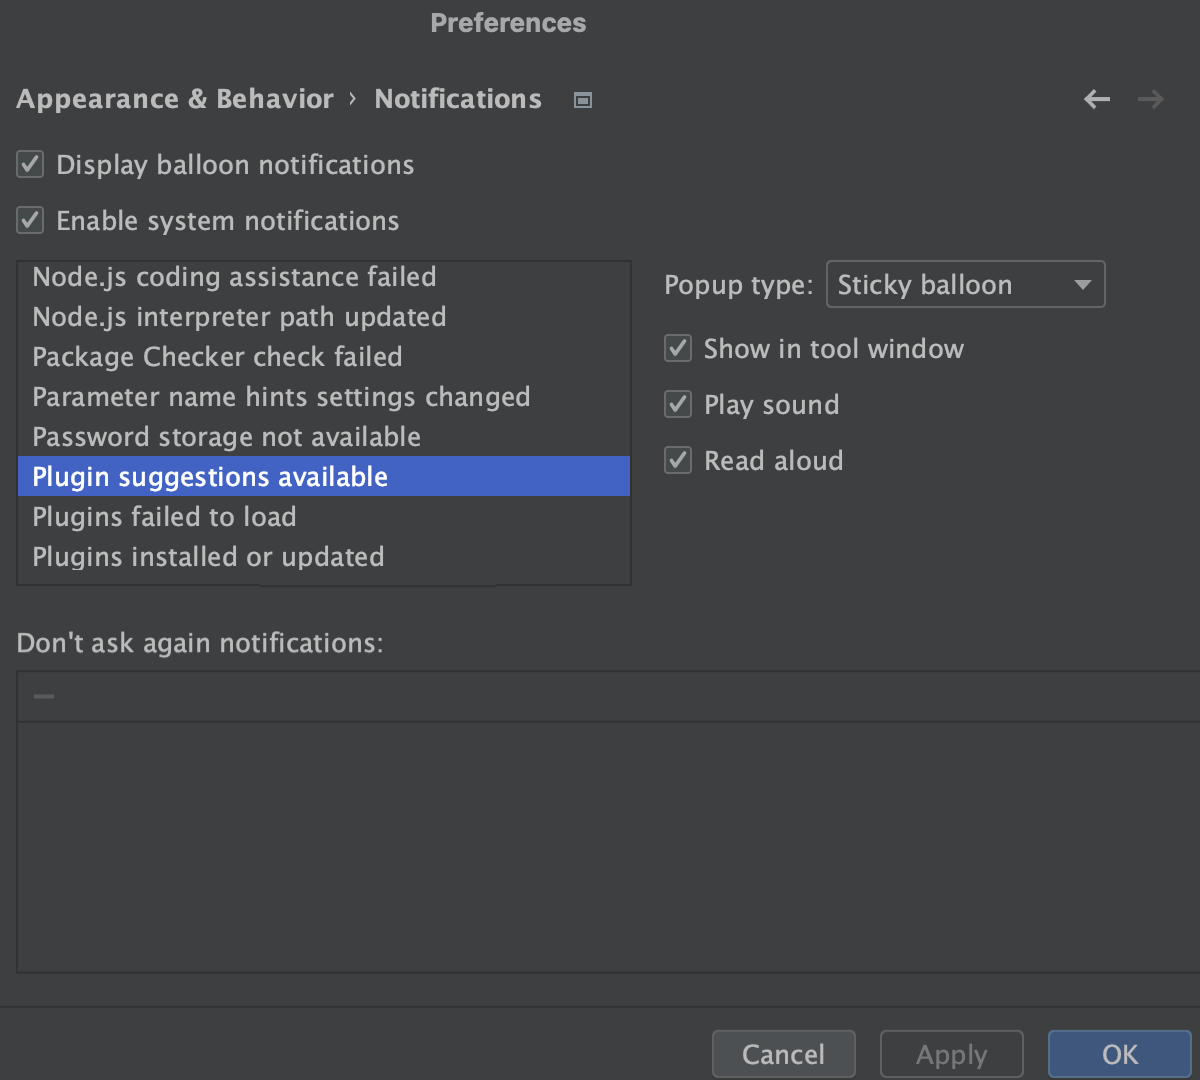 Configuring notification settings